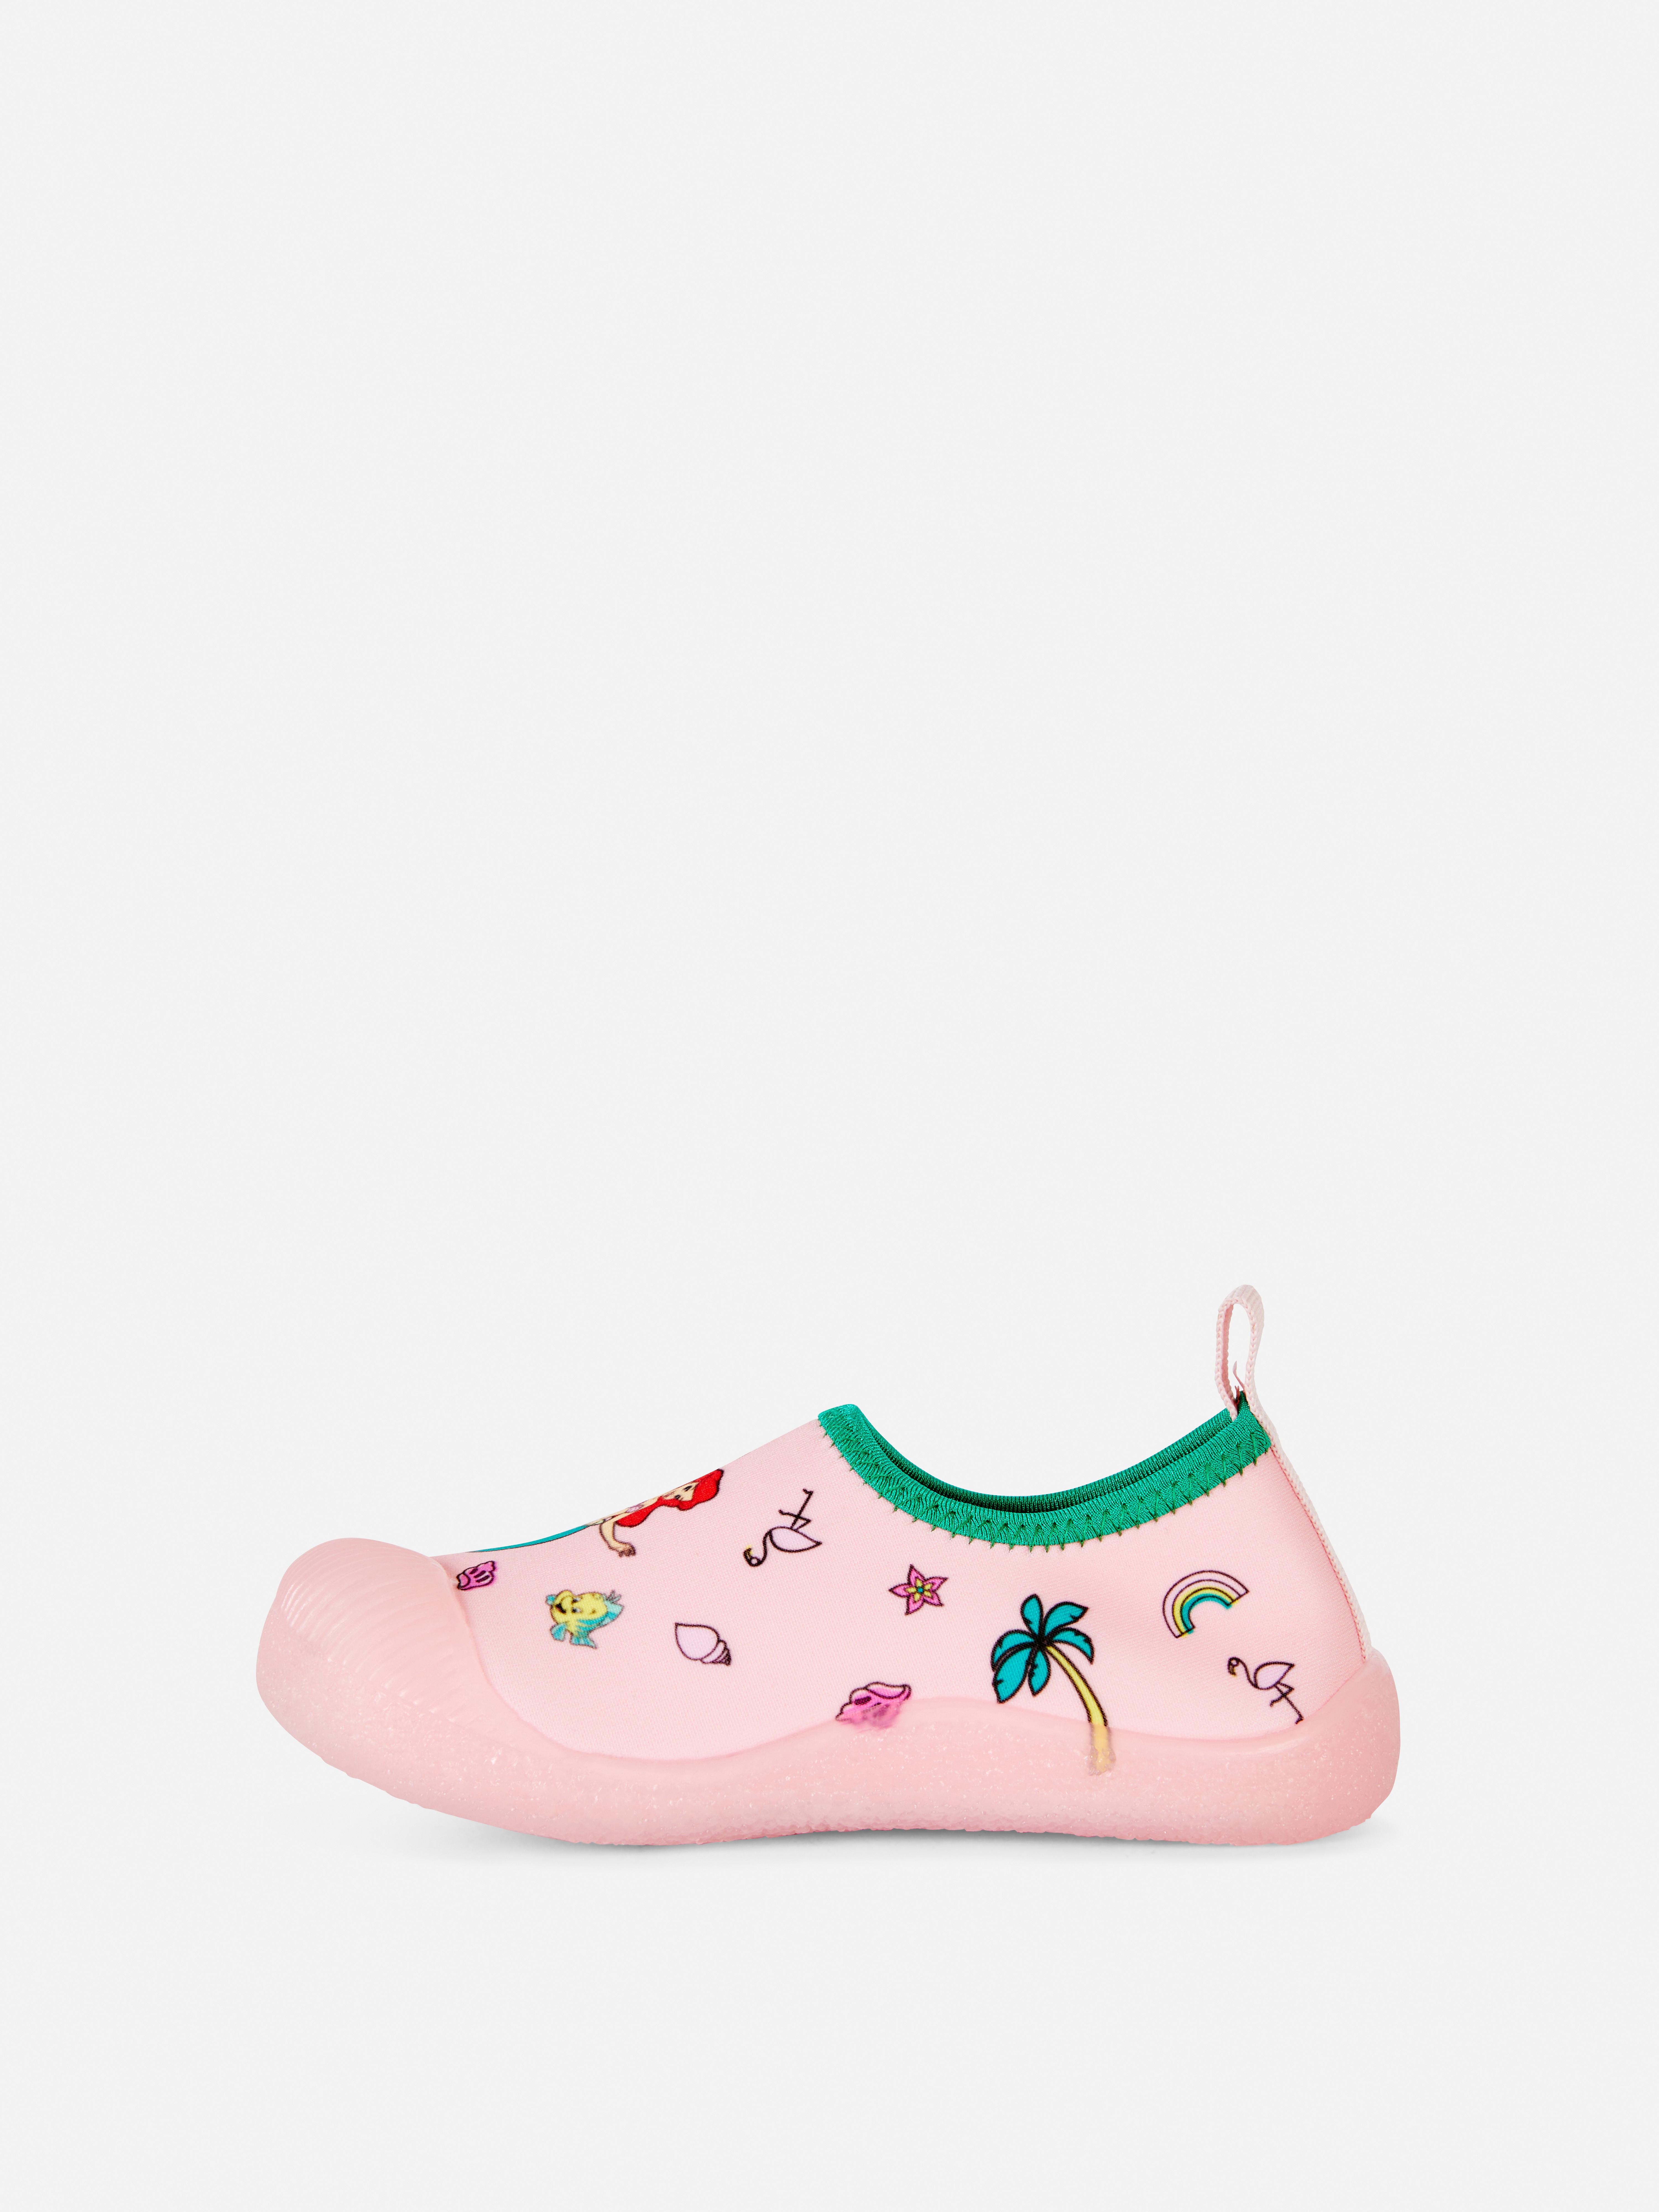 Disney's The Little Mermaid Water Shoes